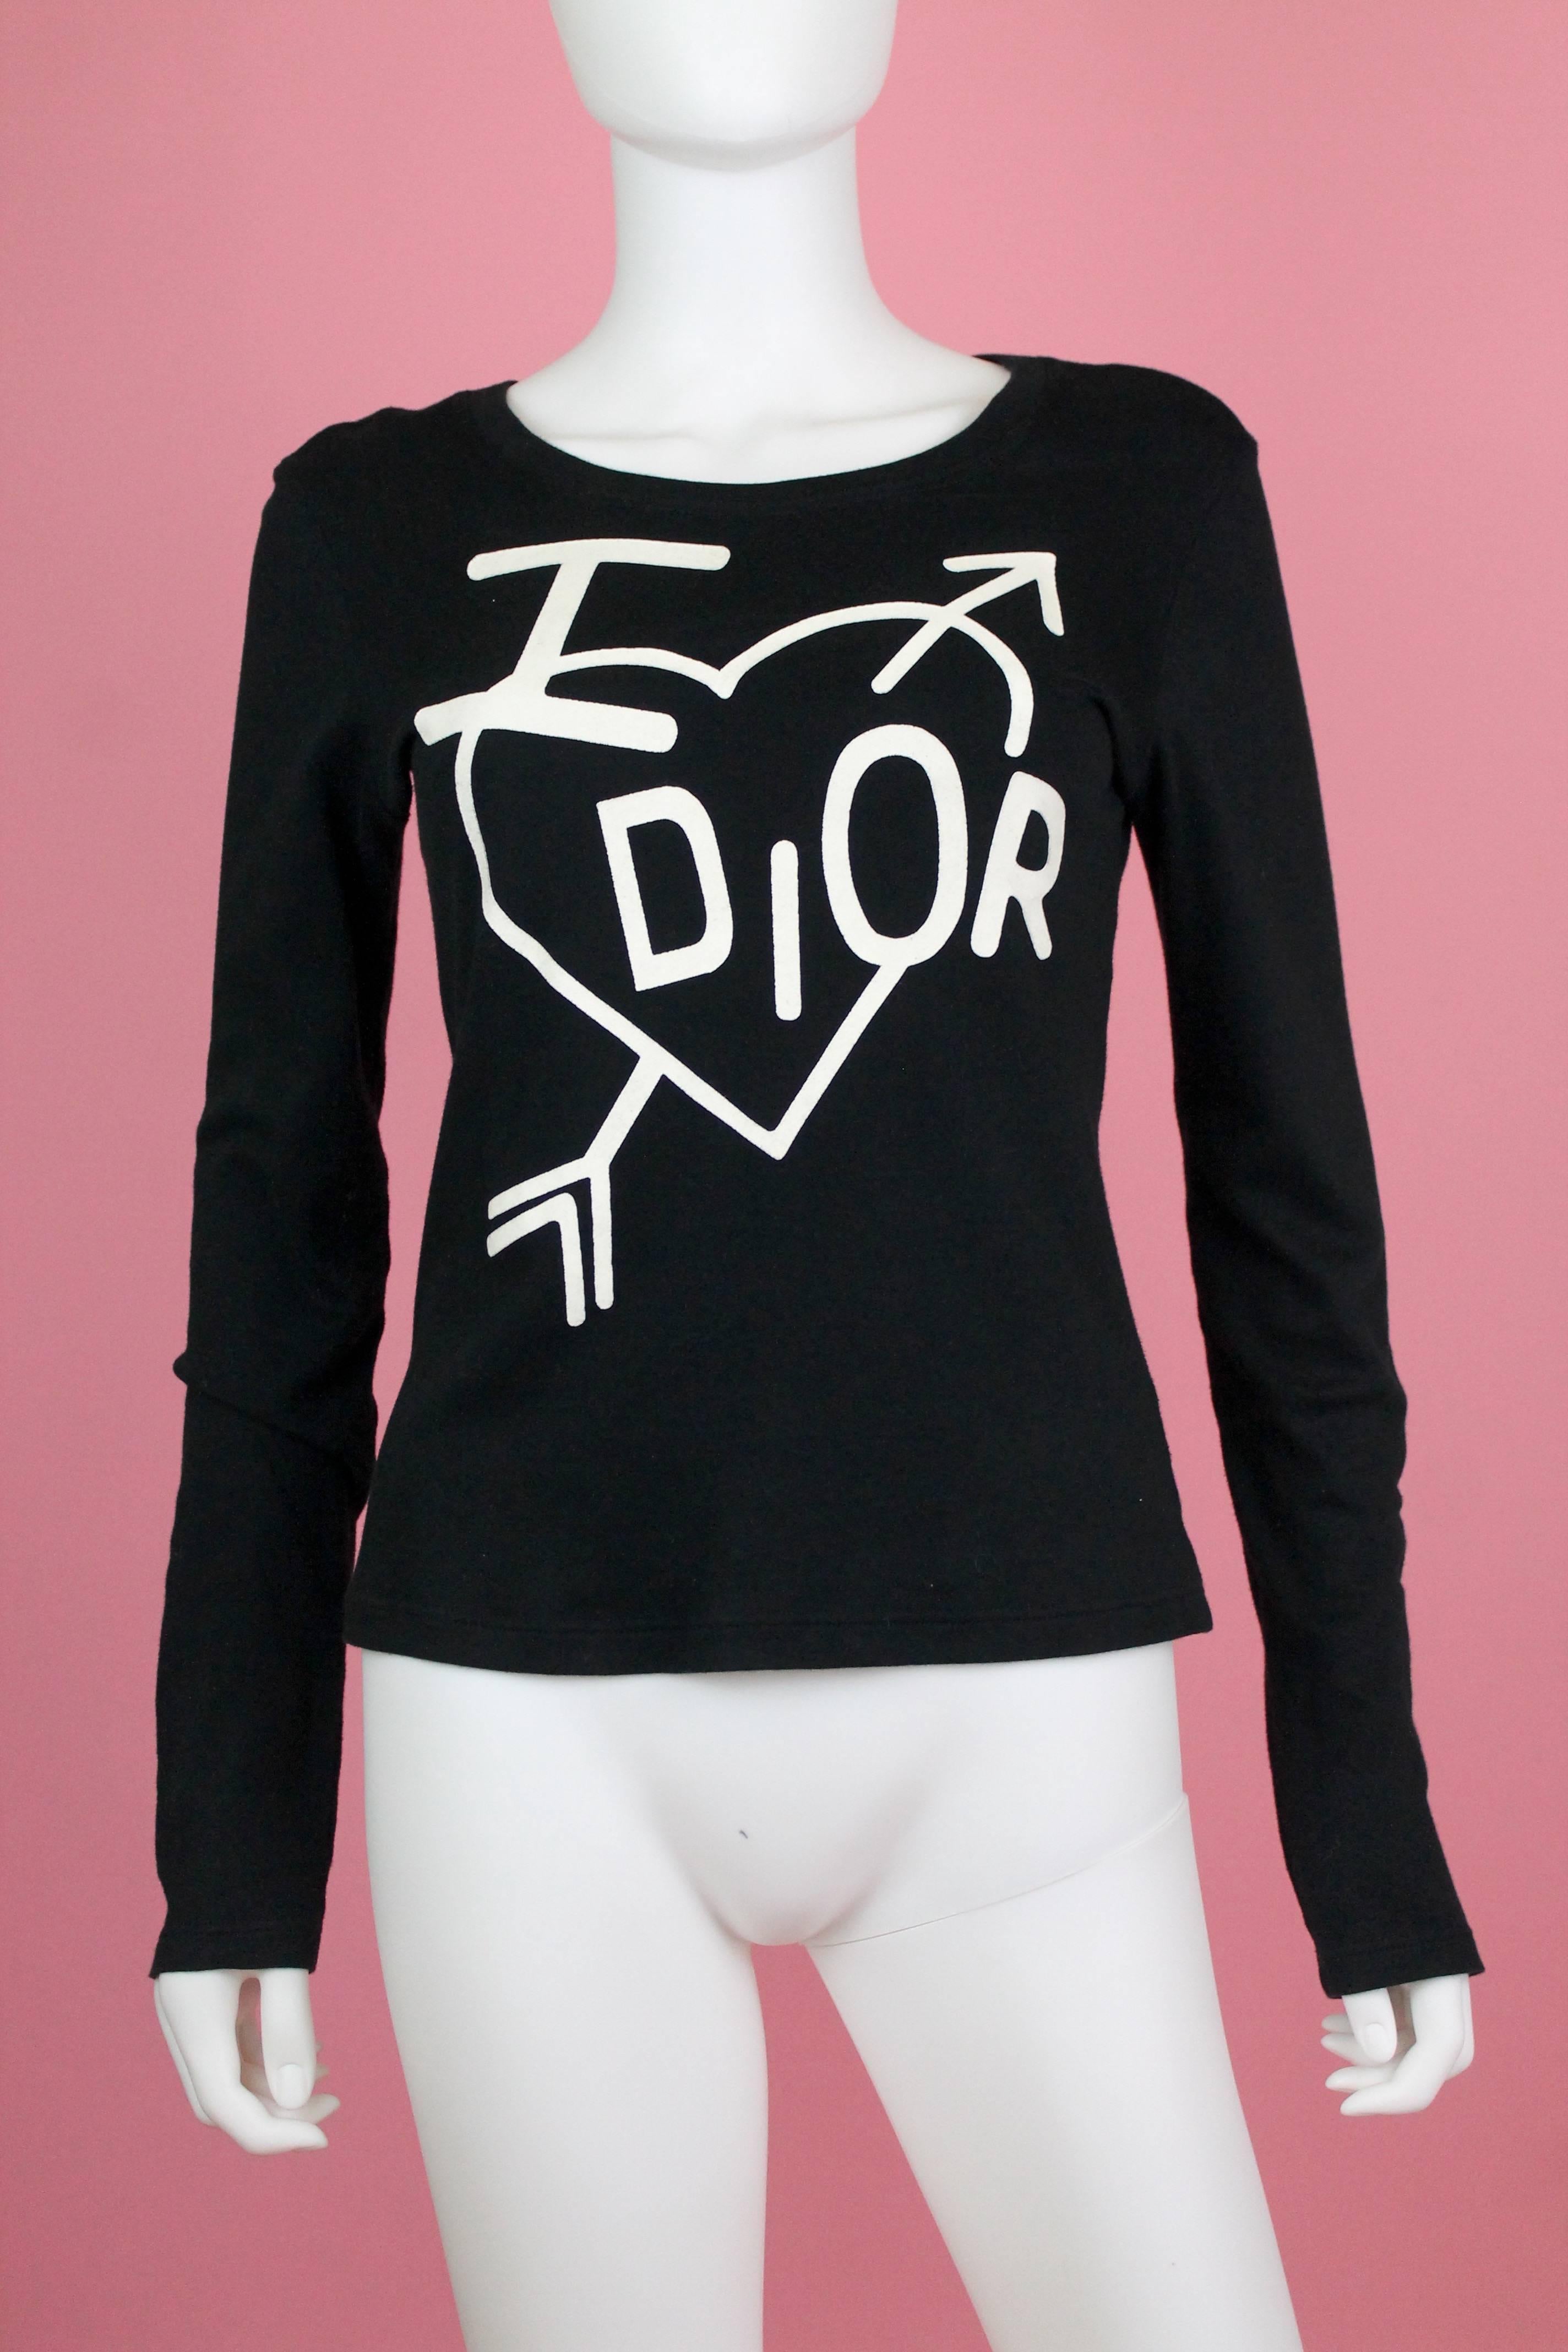 -Adorable long sleeve t-shirt from Christian Dior under Galliano's tenure
-Features 